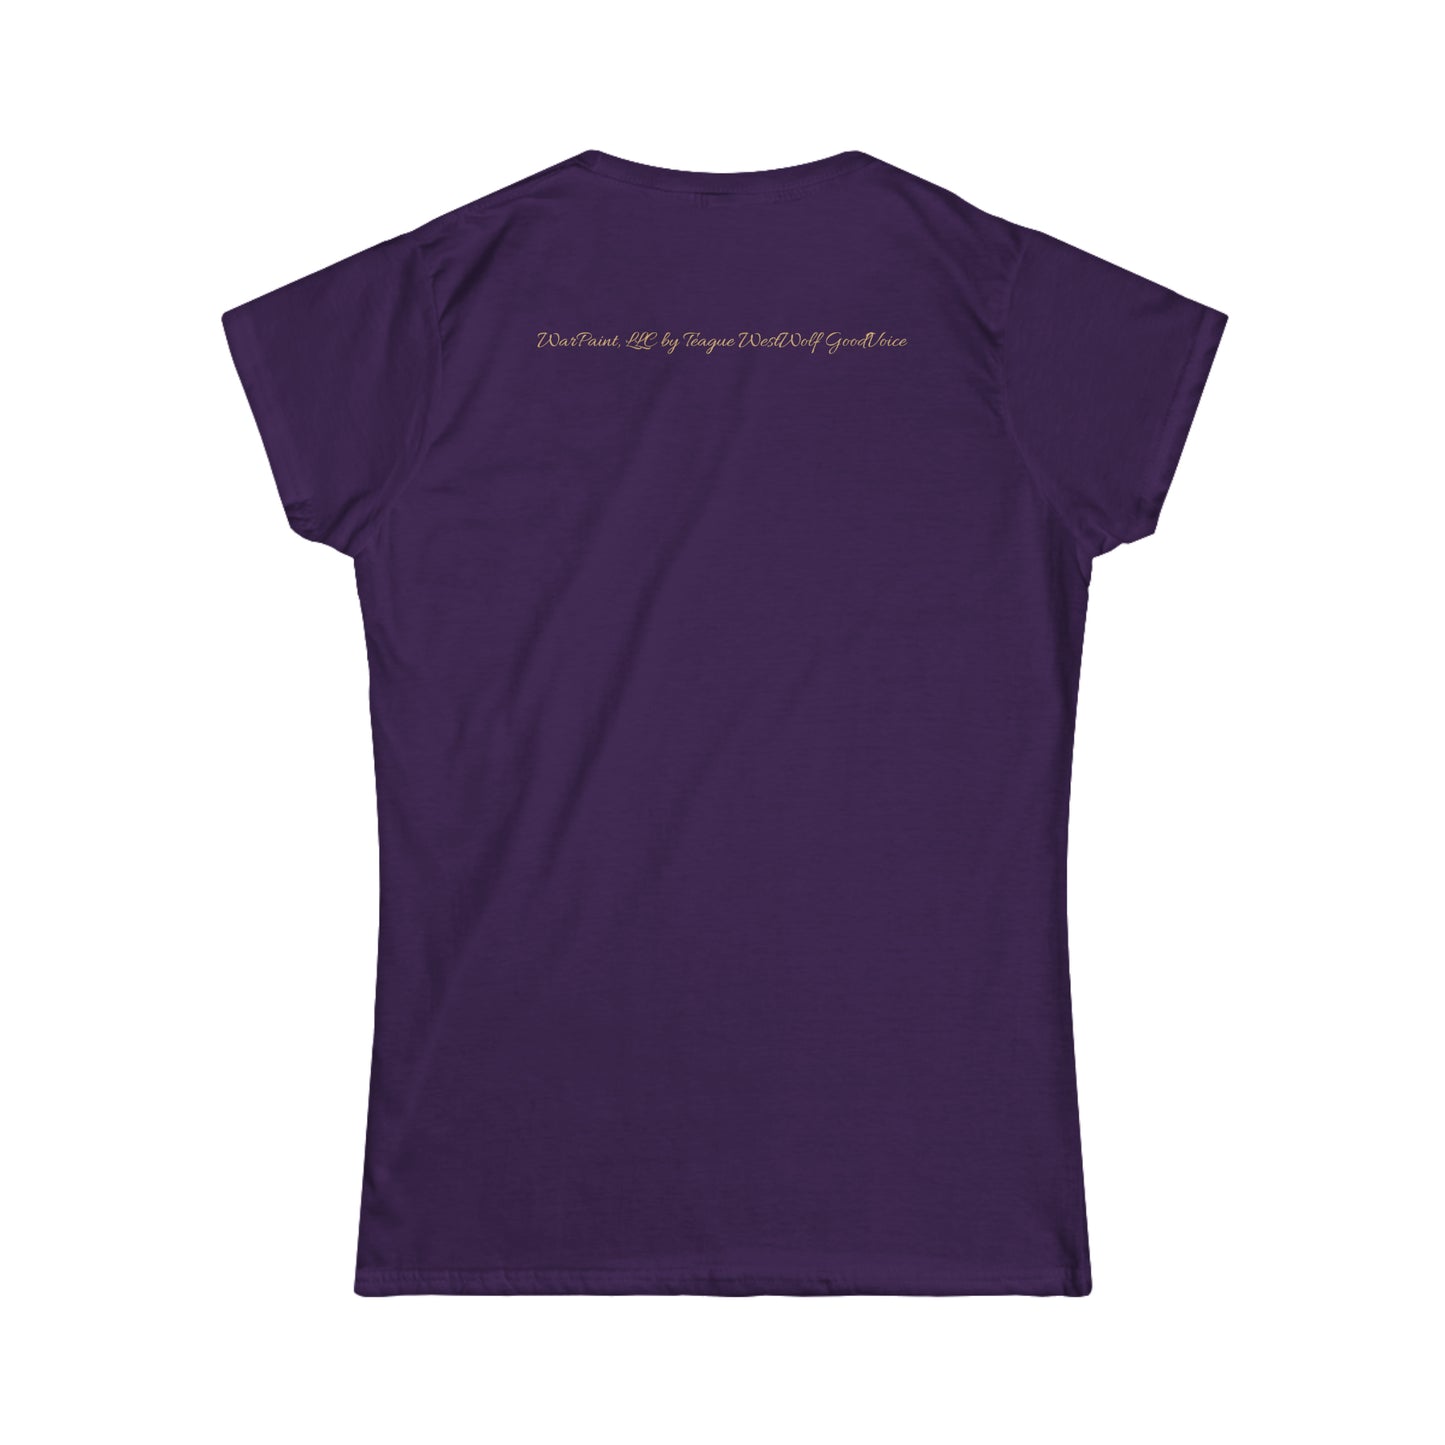 When it Doubt, Smudge it Out - Women's Softstyle Tee